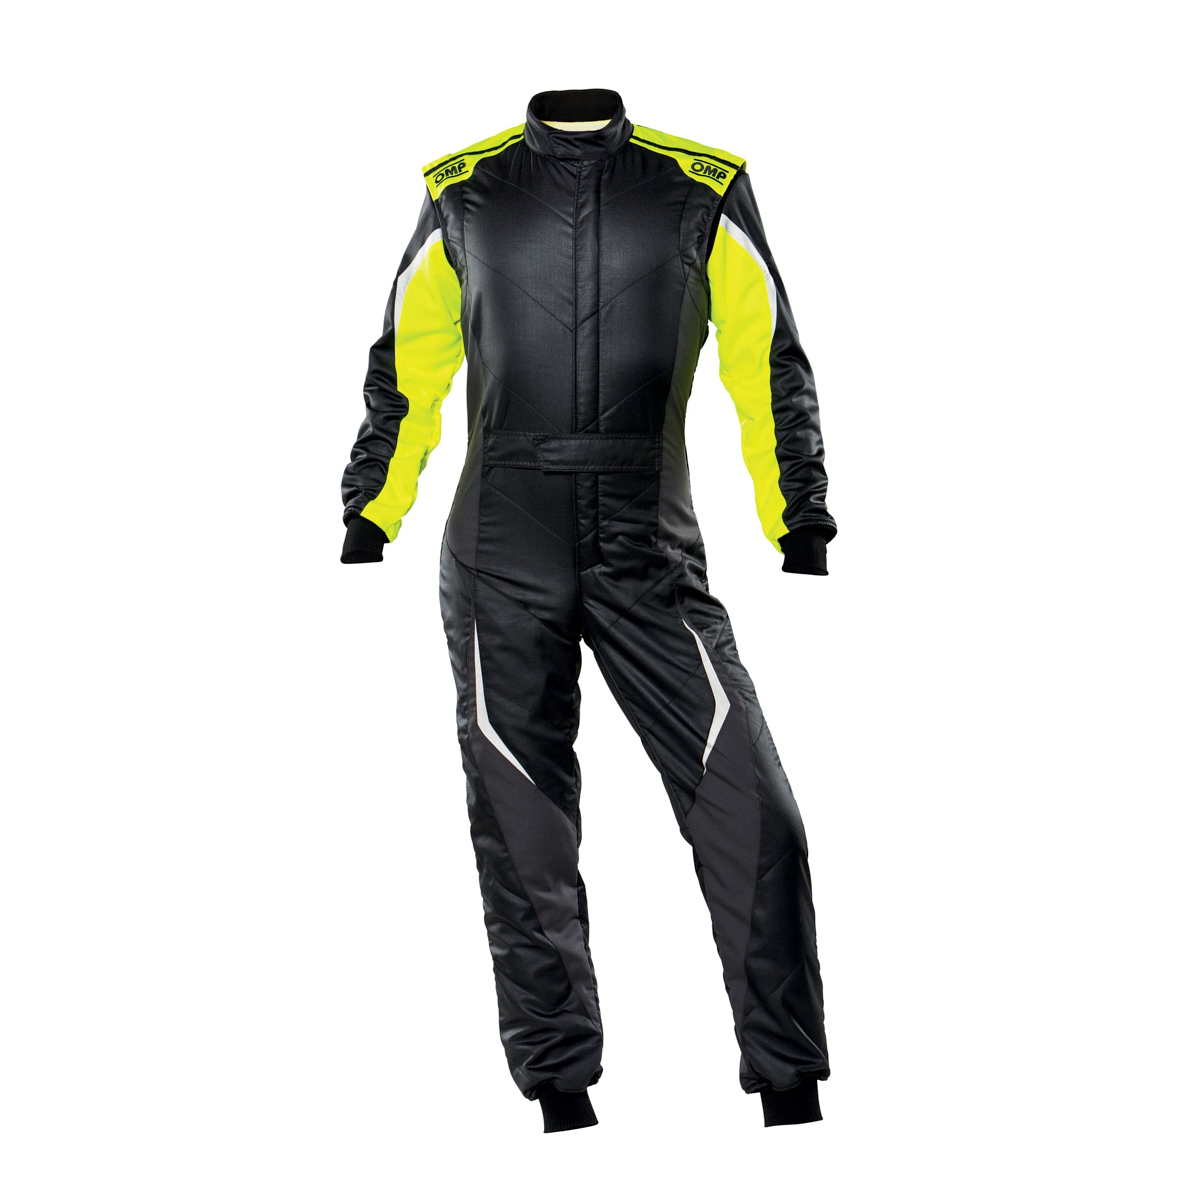 OMP Racing IA01859E17852 Driving Suit, Tecnica Evo, 1-Piece, SFI 3.2A/5, FIA Approved, Double Layer, Fire Retardant Fabric, Black / Fluorescent Yellow, Size 52, Each